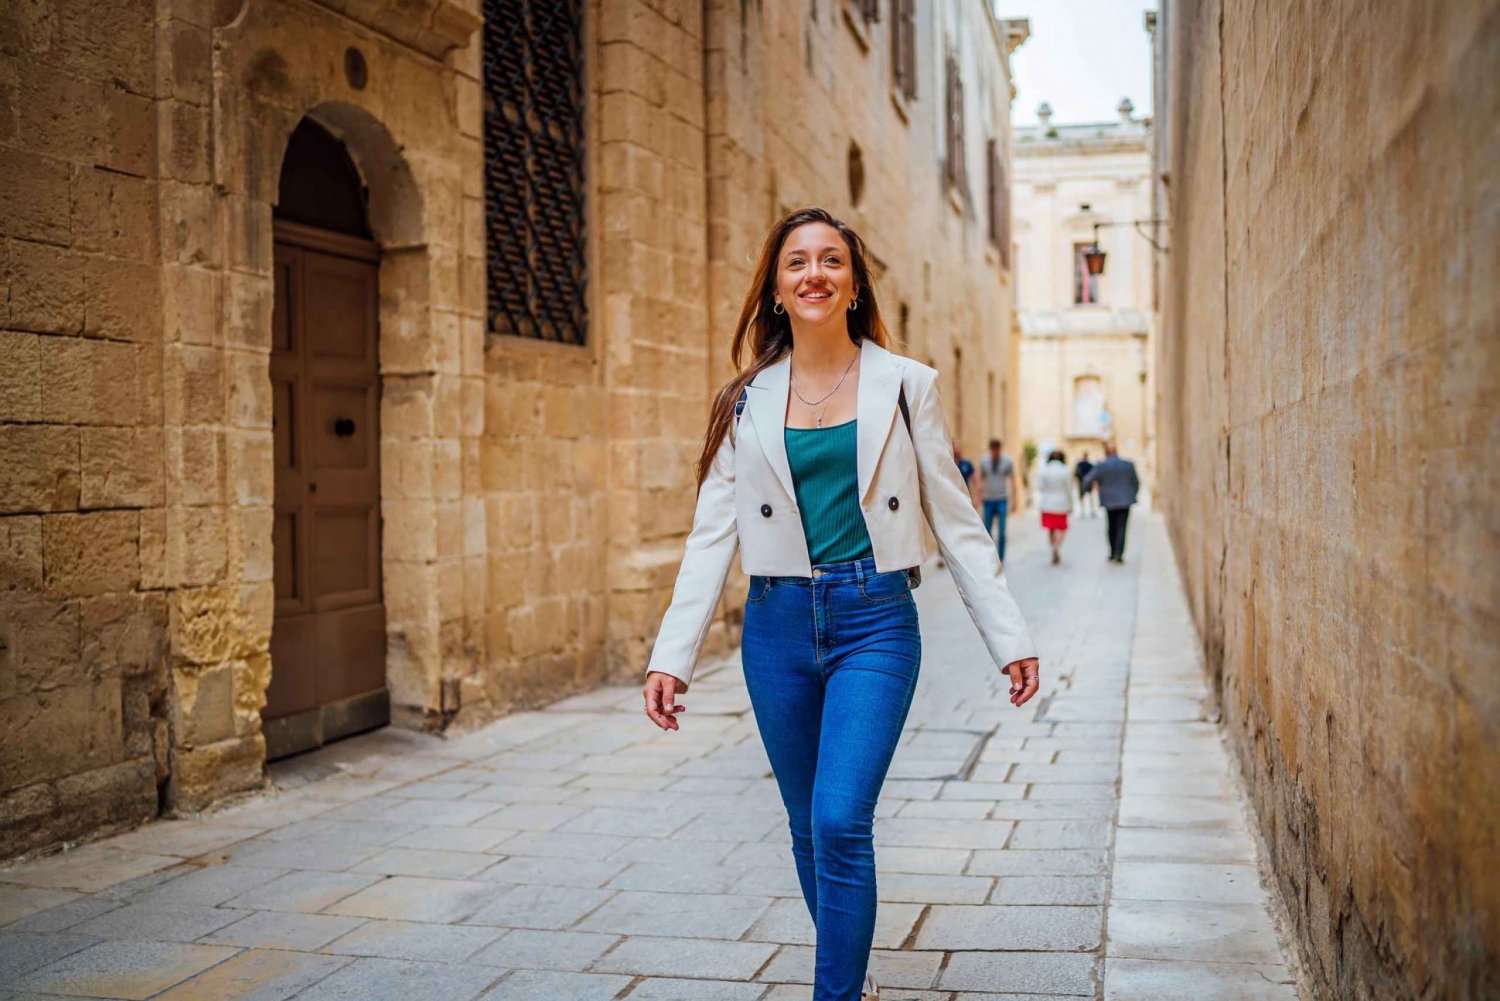 Valletta’s Historic Charm: A Guided Walking Tour